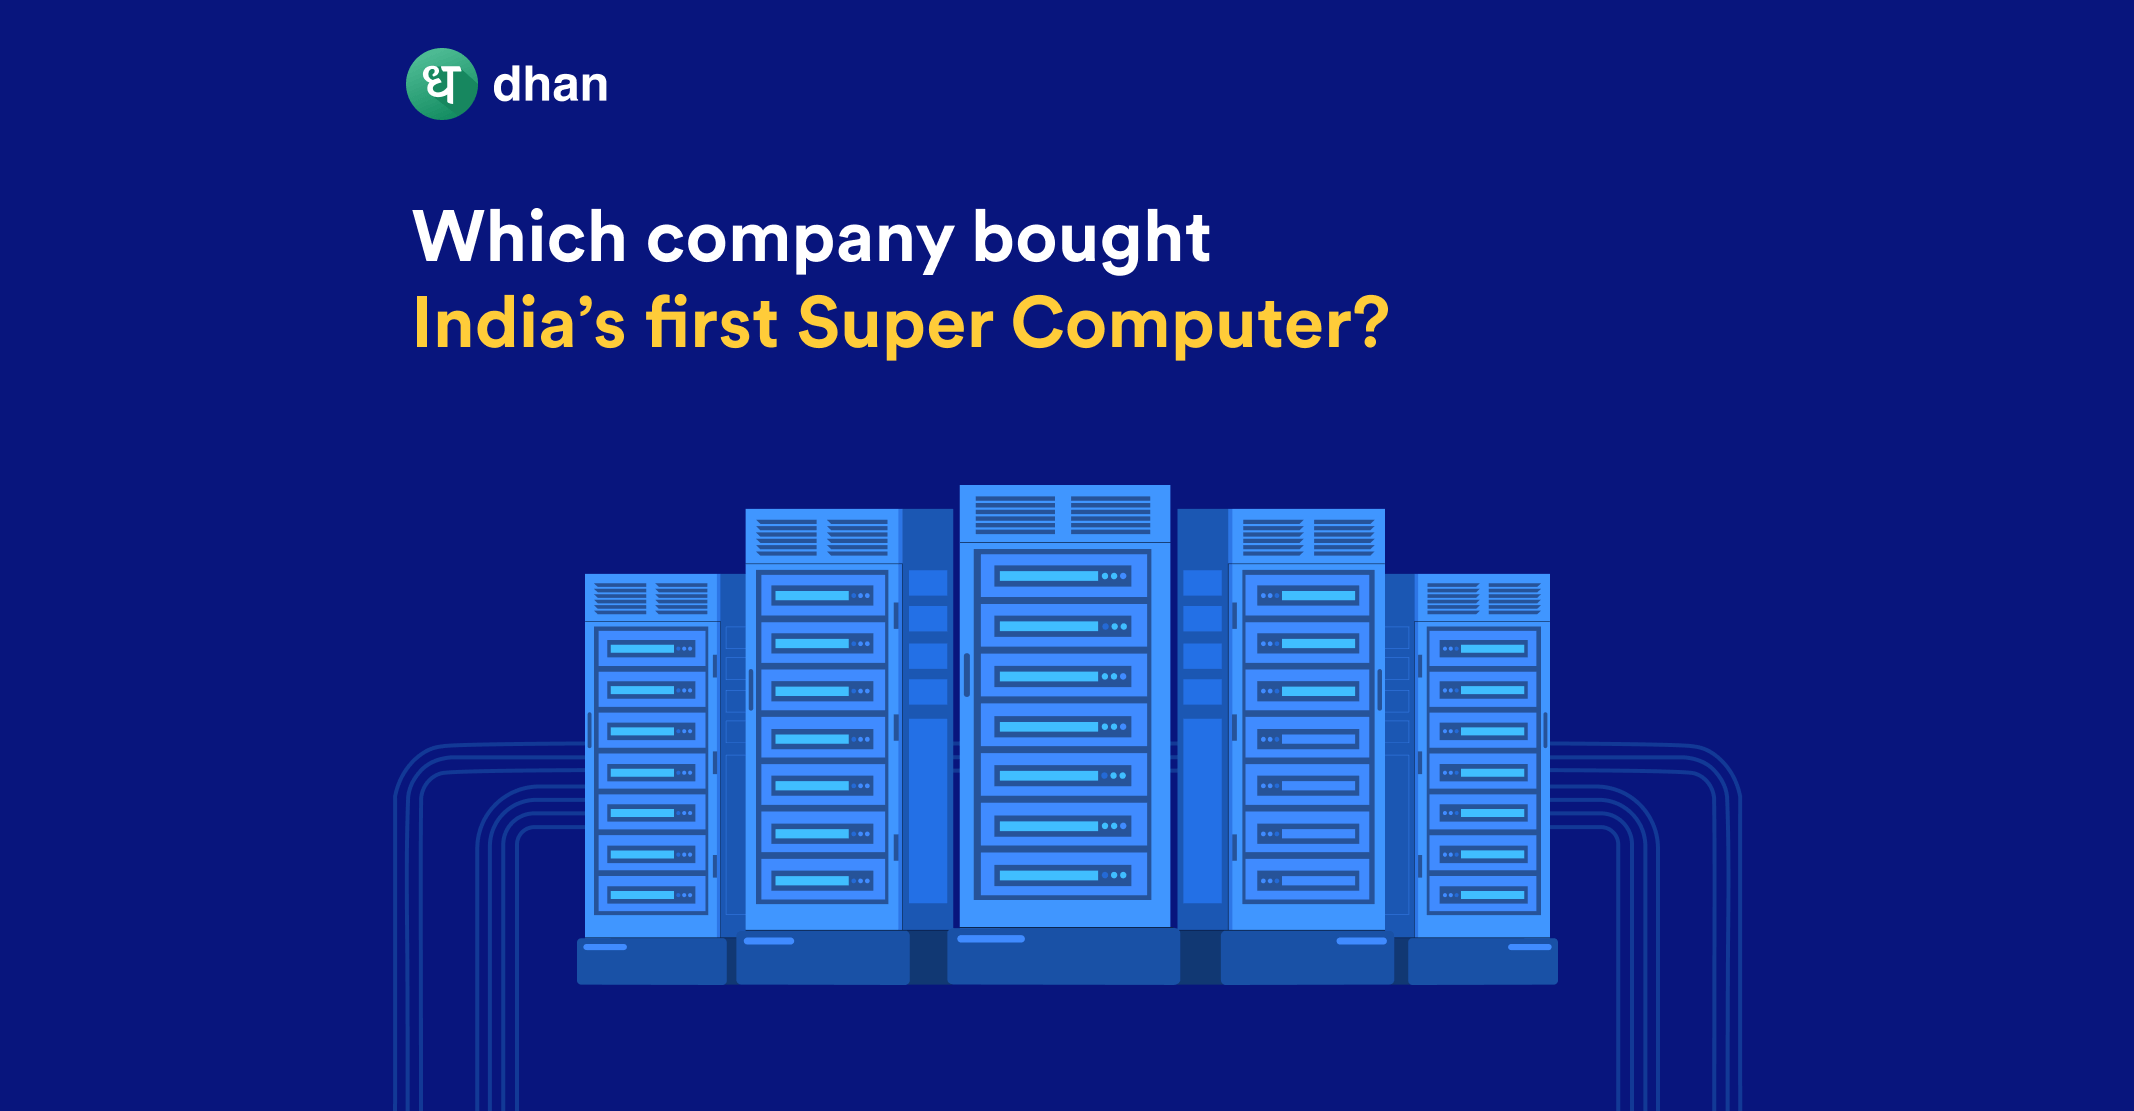 Who Bought 1st Supercomputer in India - The Unheard Secret